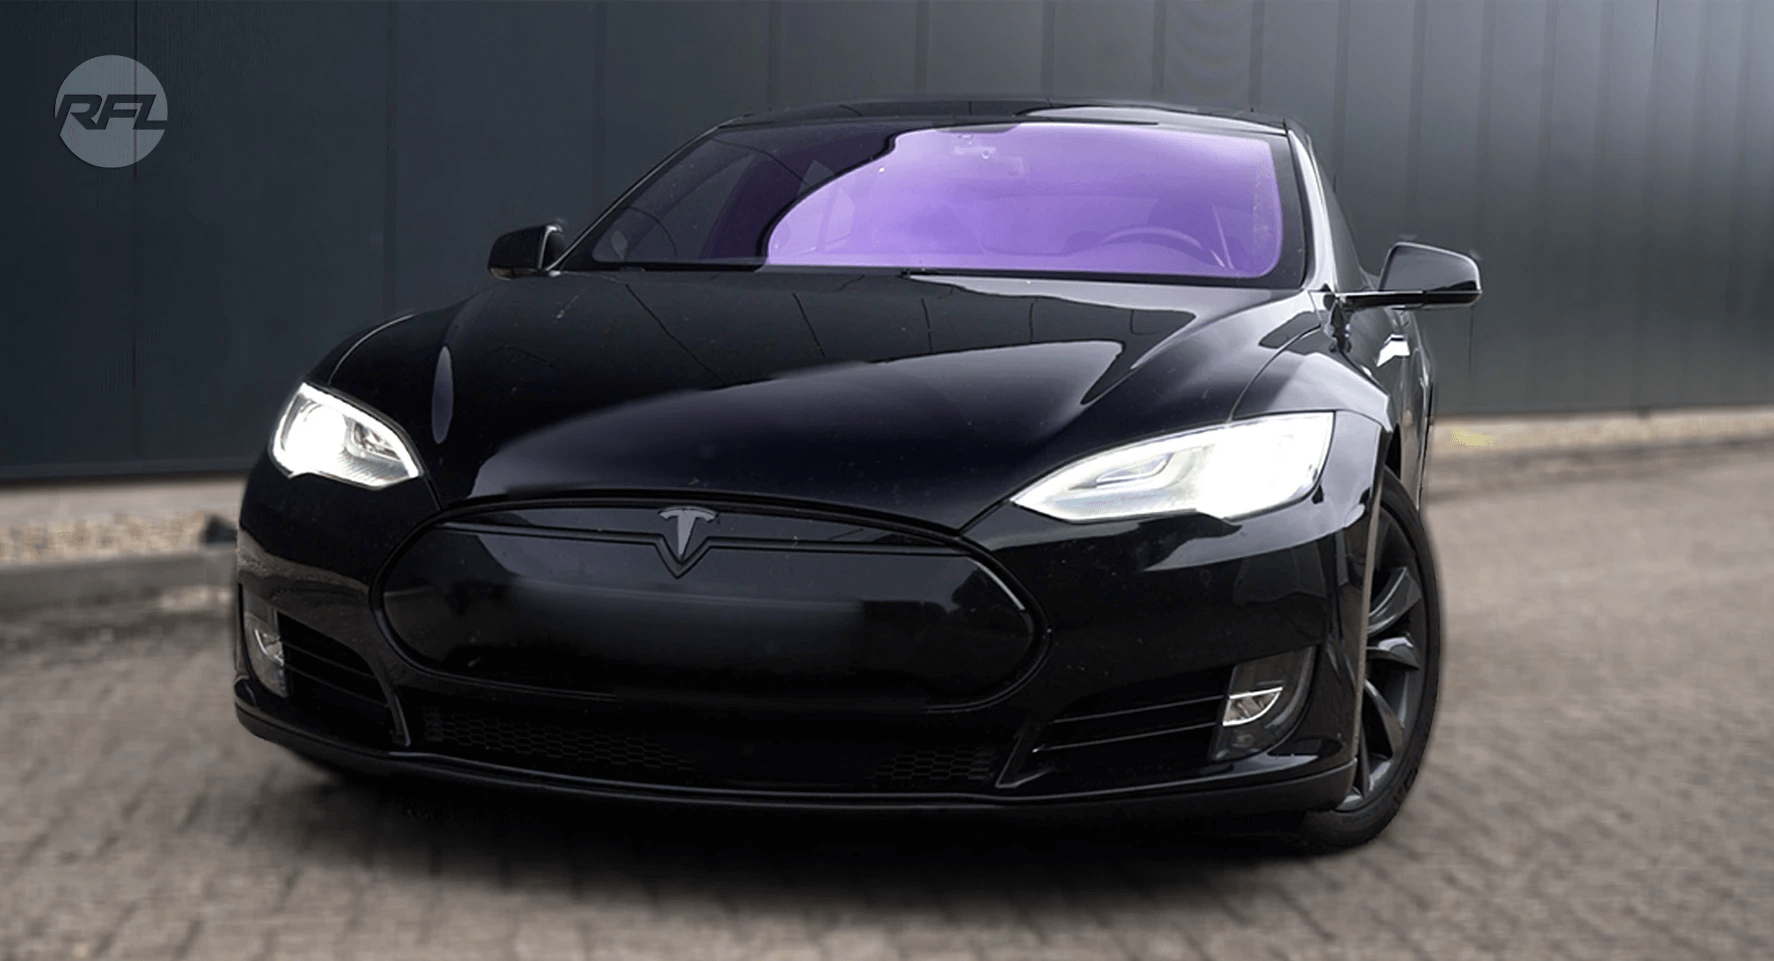 Tesla model S pre-facelift HID xenon headlight DIY repair & upgrade - How to improve the light output